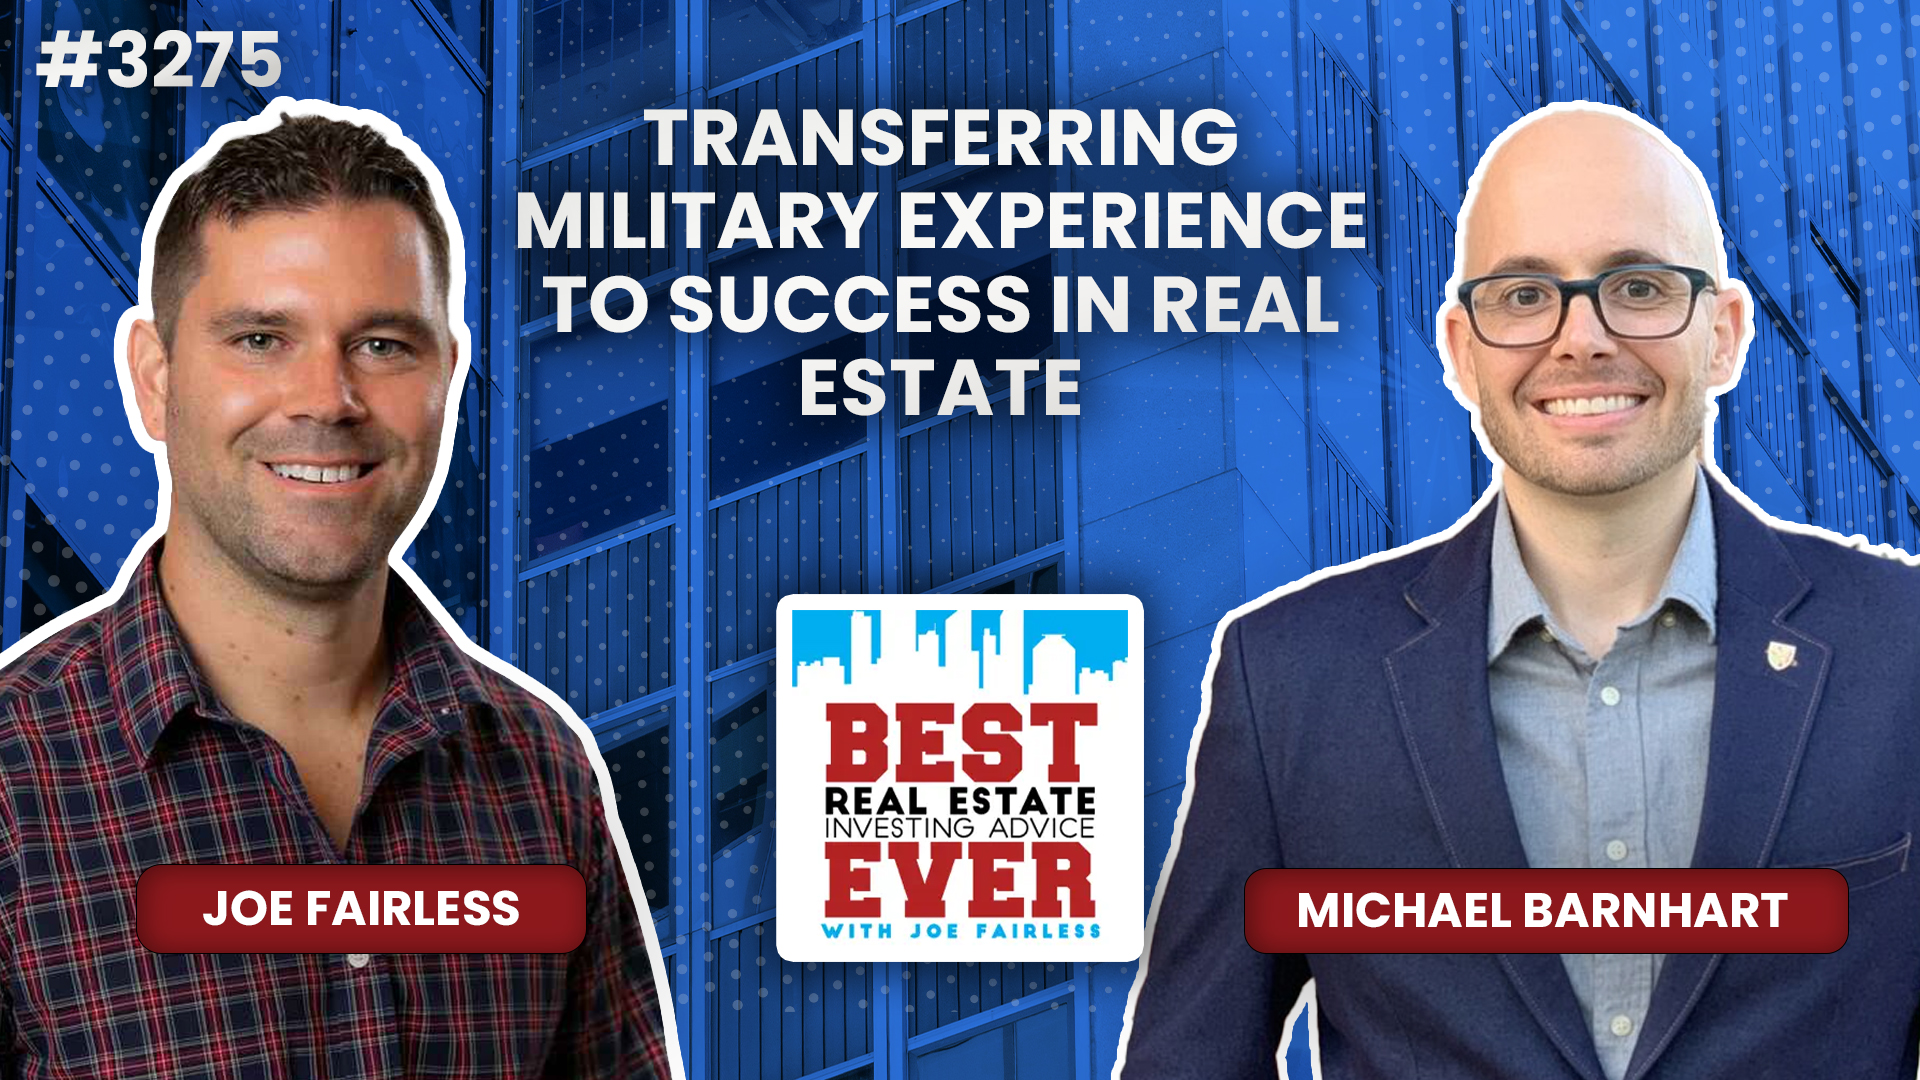 JF3275: Michael Barnhart — Transferring Military Experience to Success in Real Estate